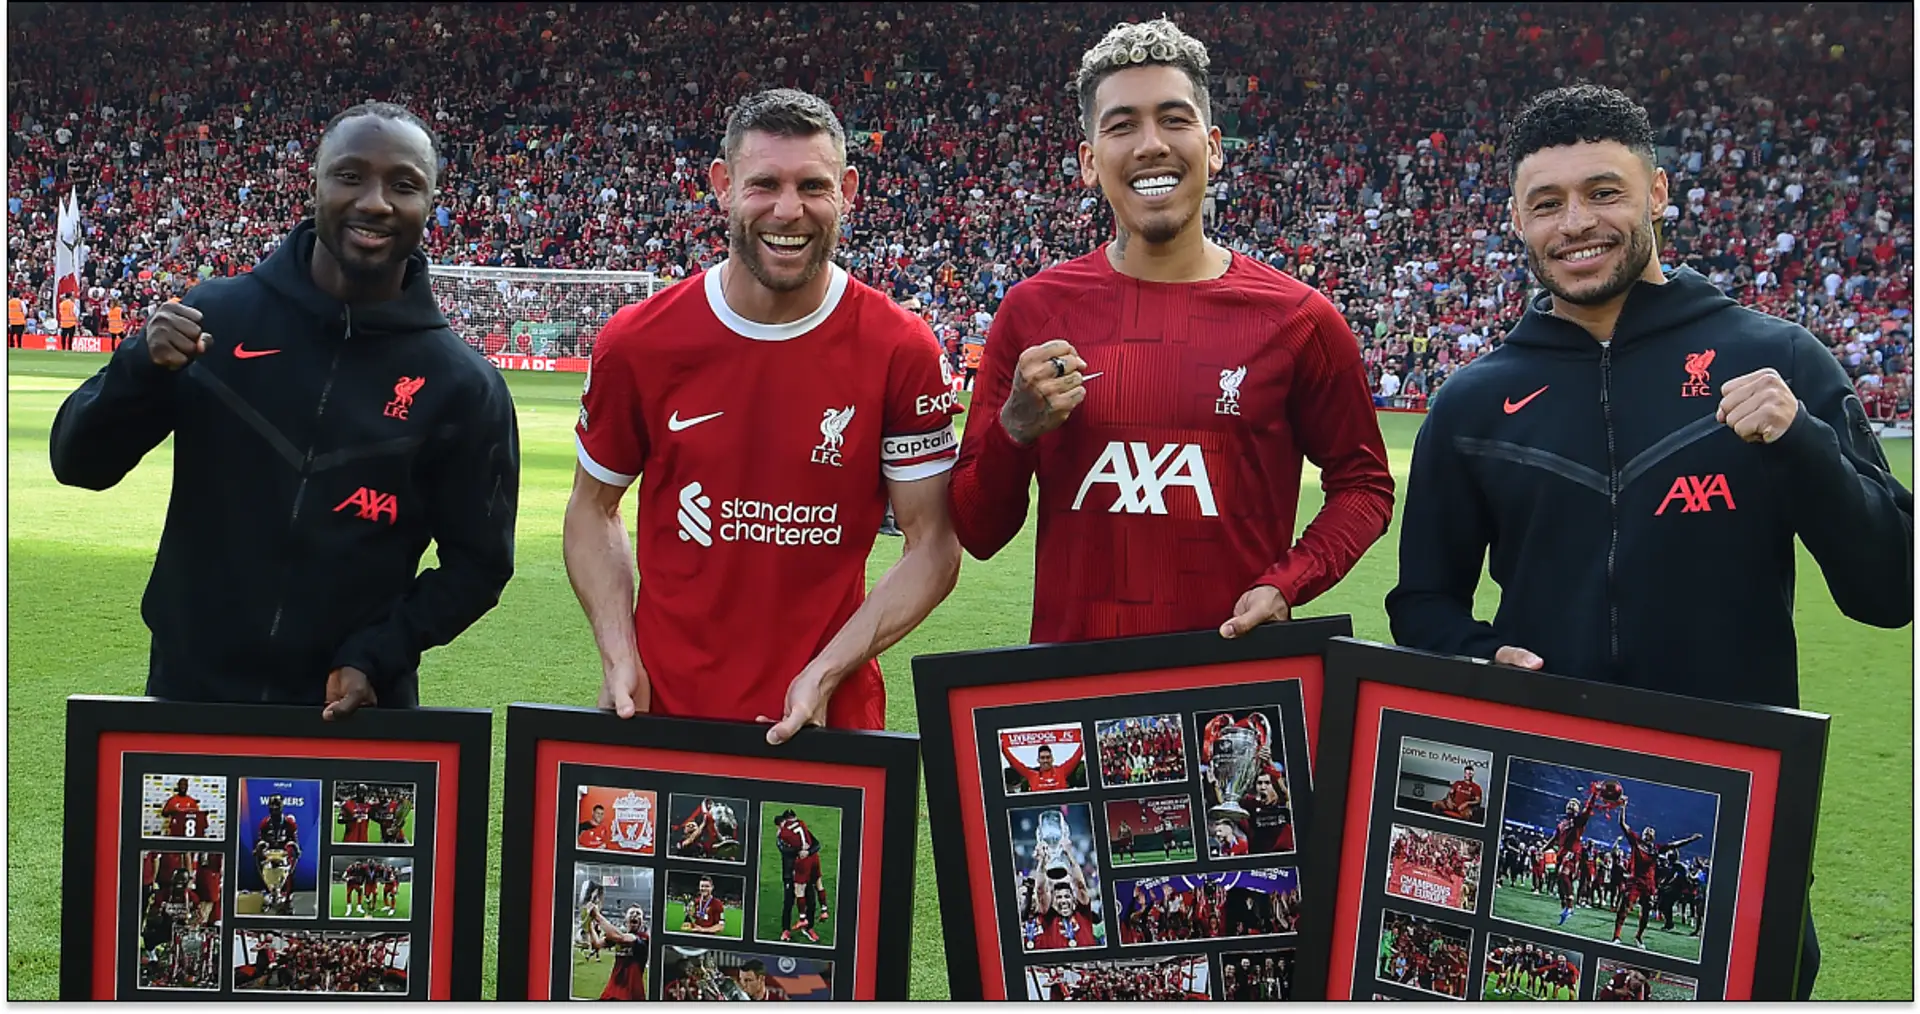 VIDEO: Liverpool send off Firmino, Milner, Oxlade-Chamberlain & Keita with guard of honour